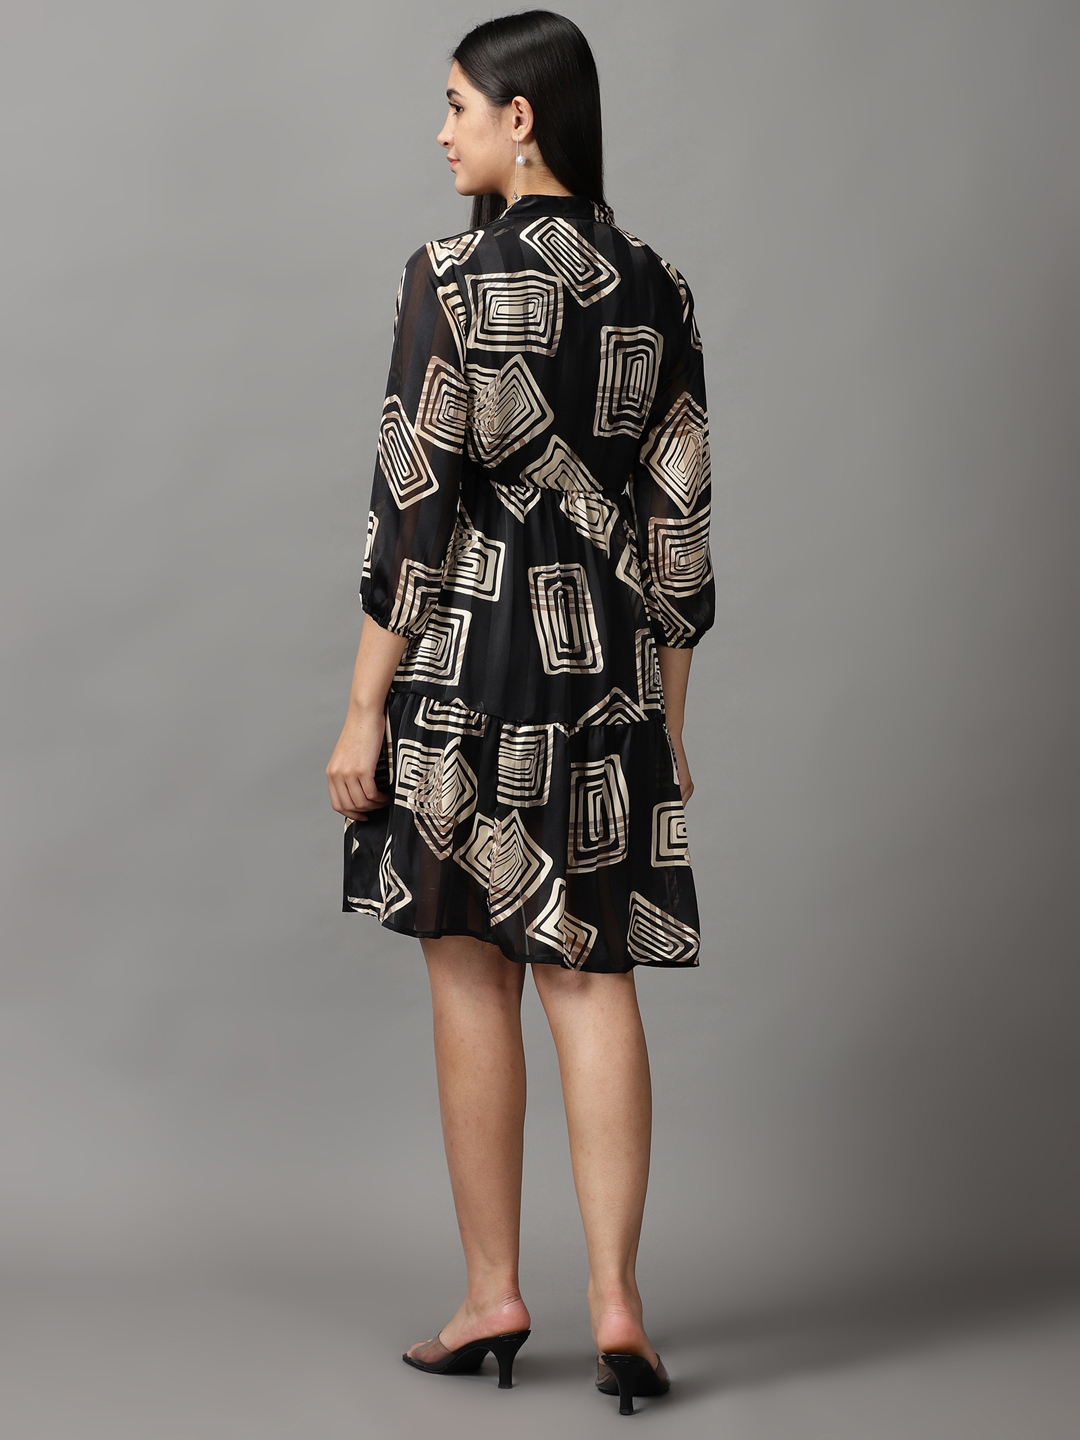 Showoff | SHOWOFF Women Black Printed Keyhole Neck Three-Quarter Sleeves Above Knee Fit and Flare Dress 3